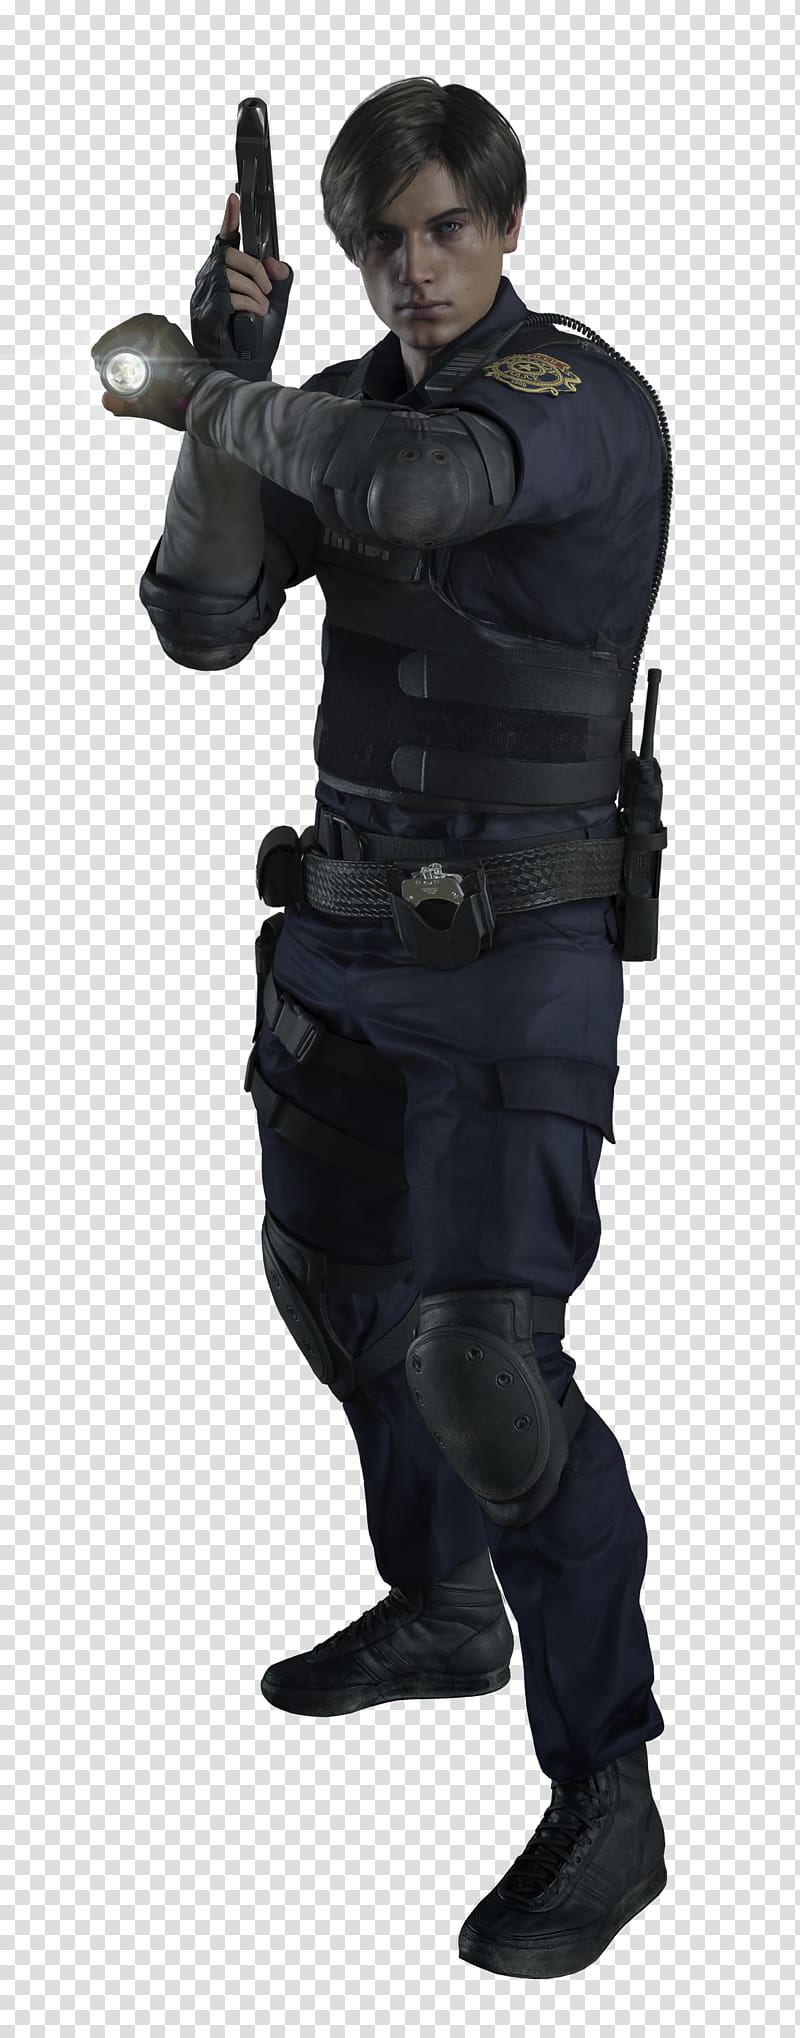 Police, Resident Evil 2, Leon S Kennedy, Ada Wong, Claire Redfield, Resident Evil 4, Video Games, Resident Evil Operation Raccoon City transparent background PNG clipart